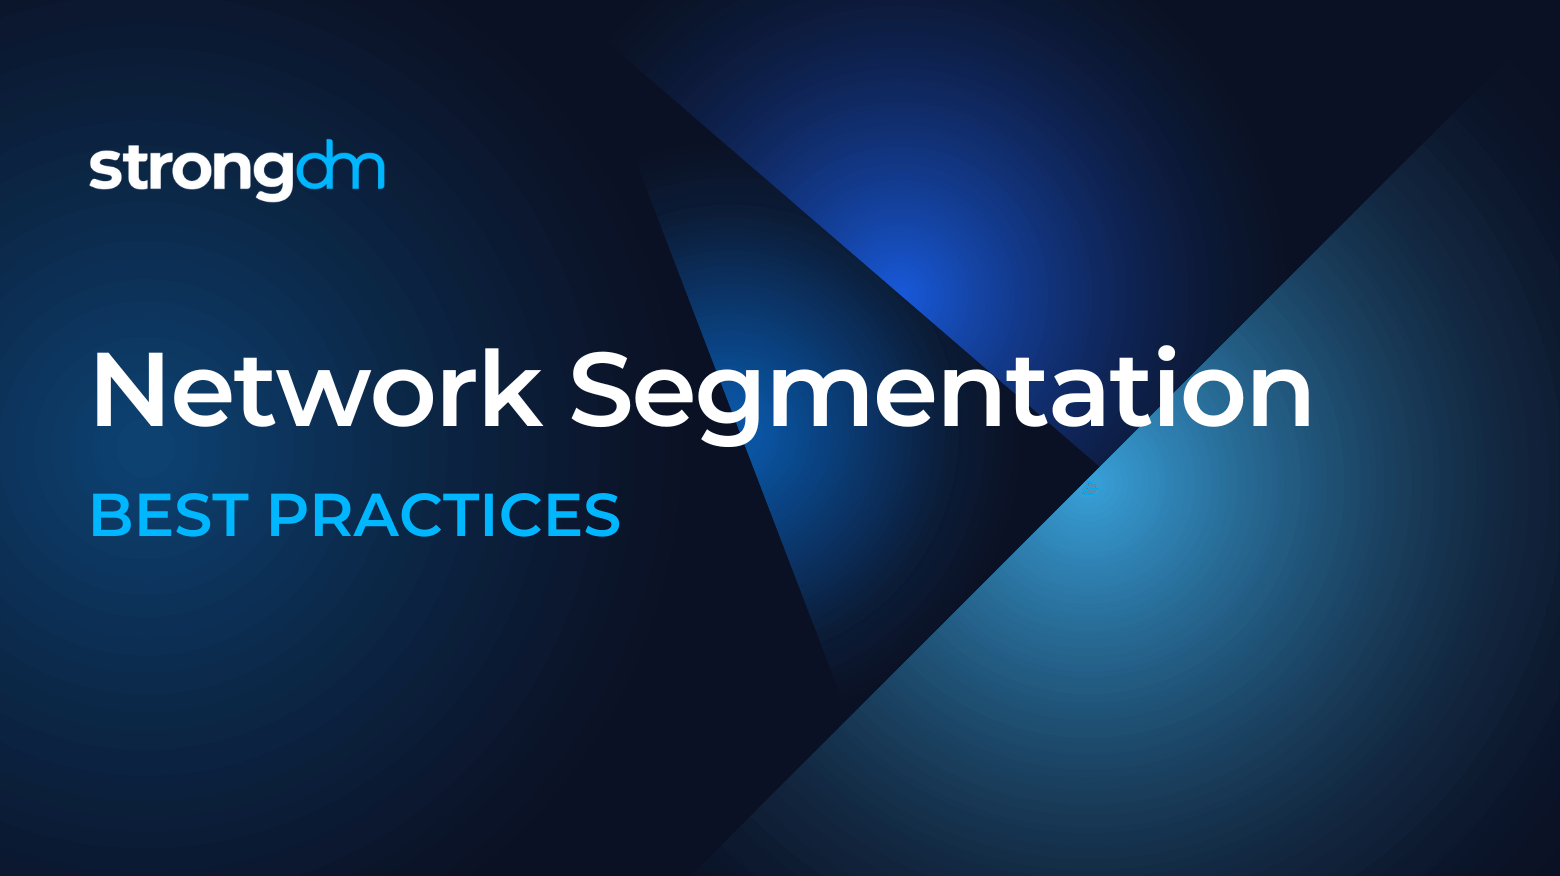 7 Network Segmentation Best Practices to Level-up Your Security